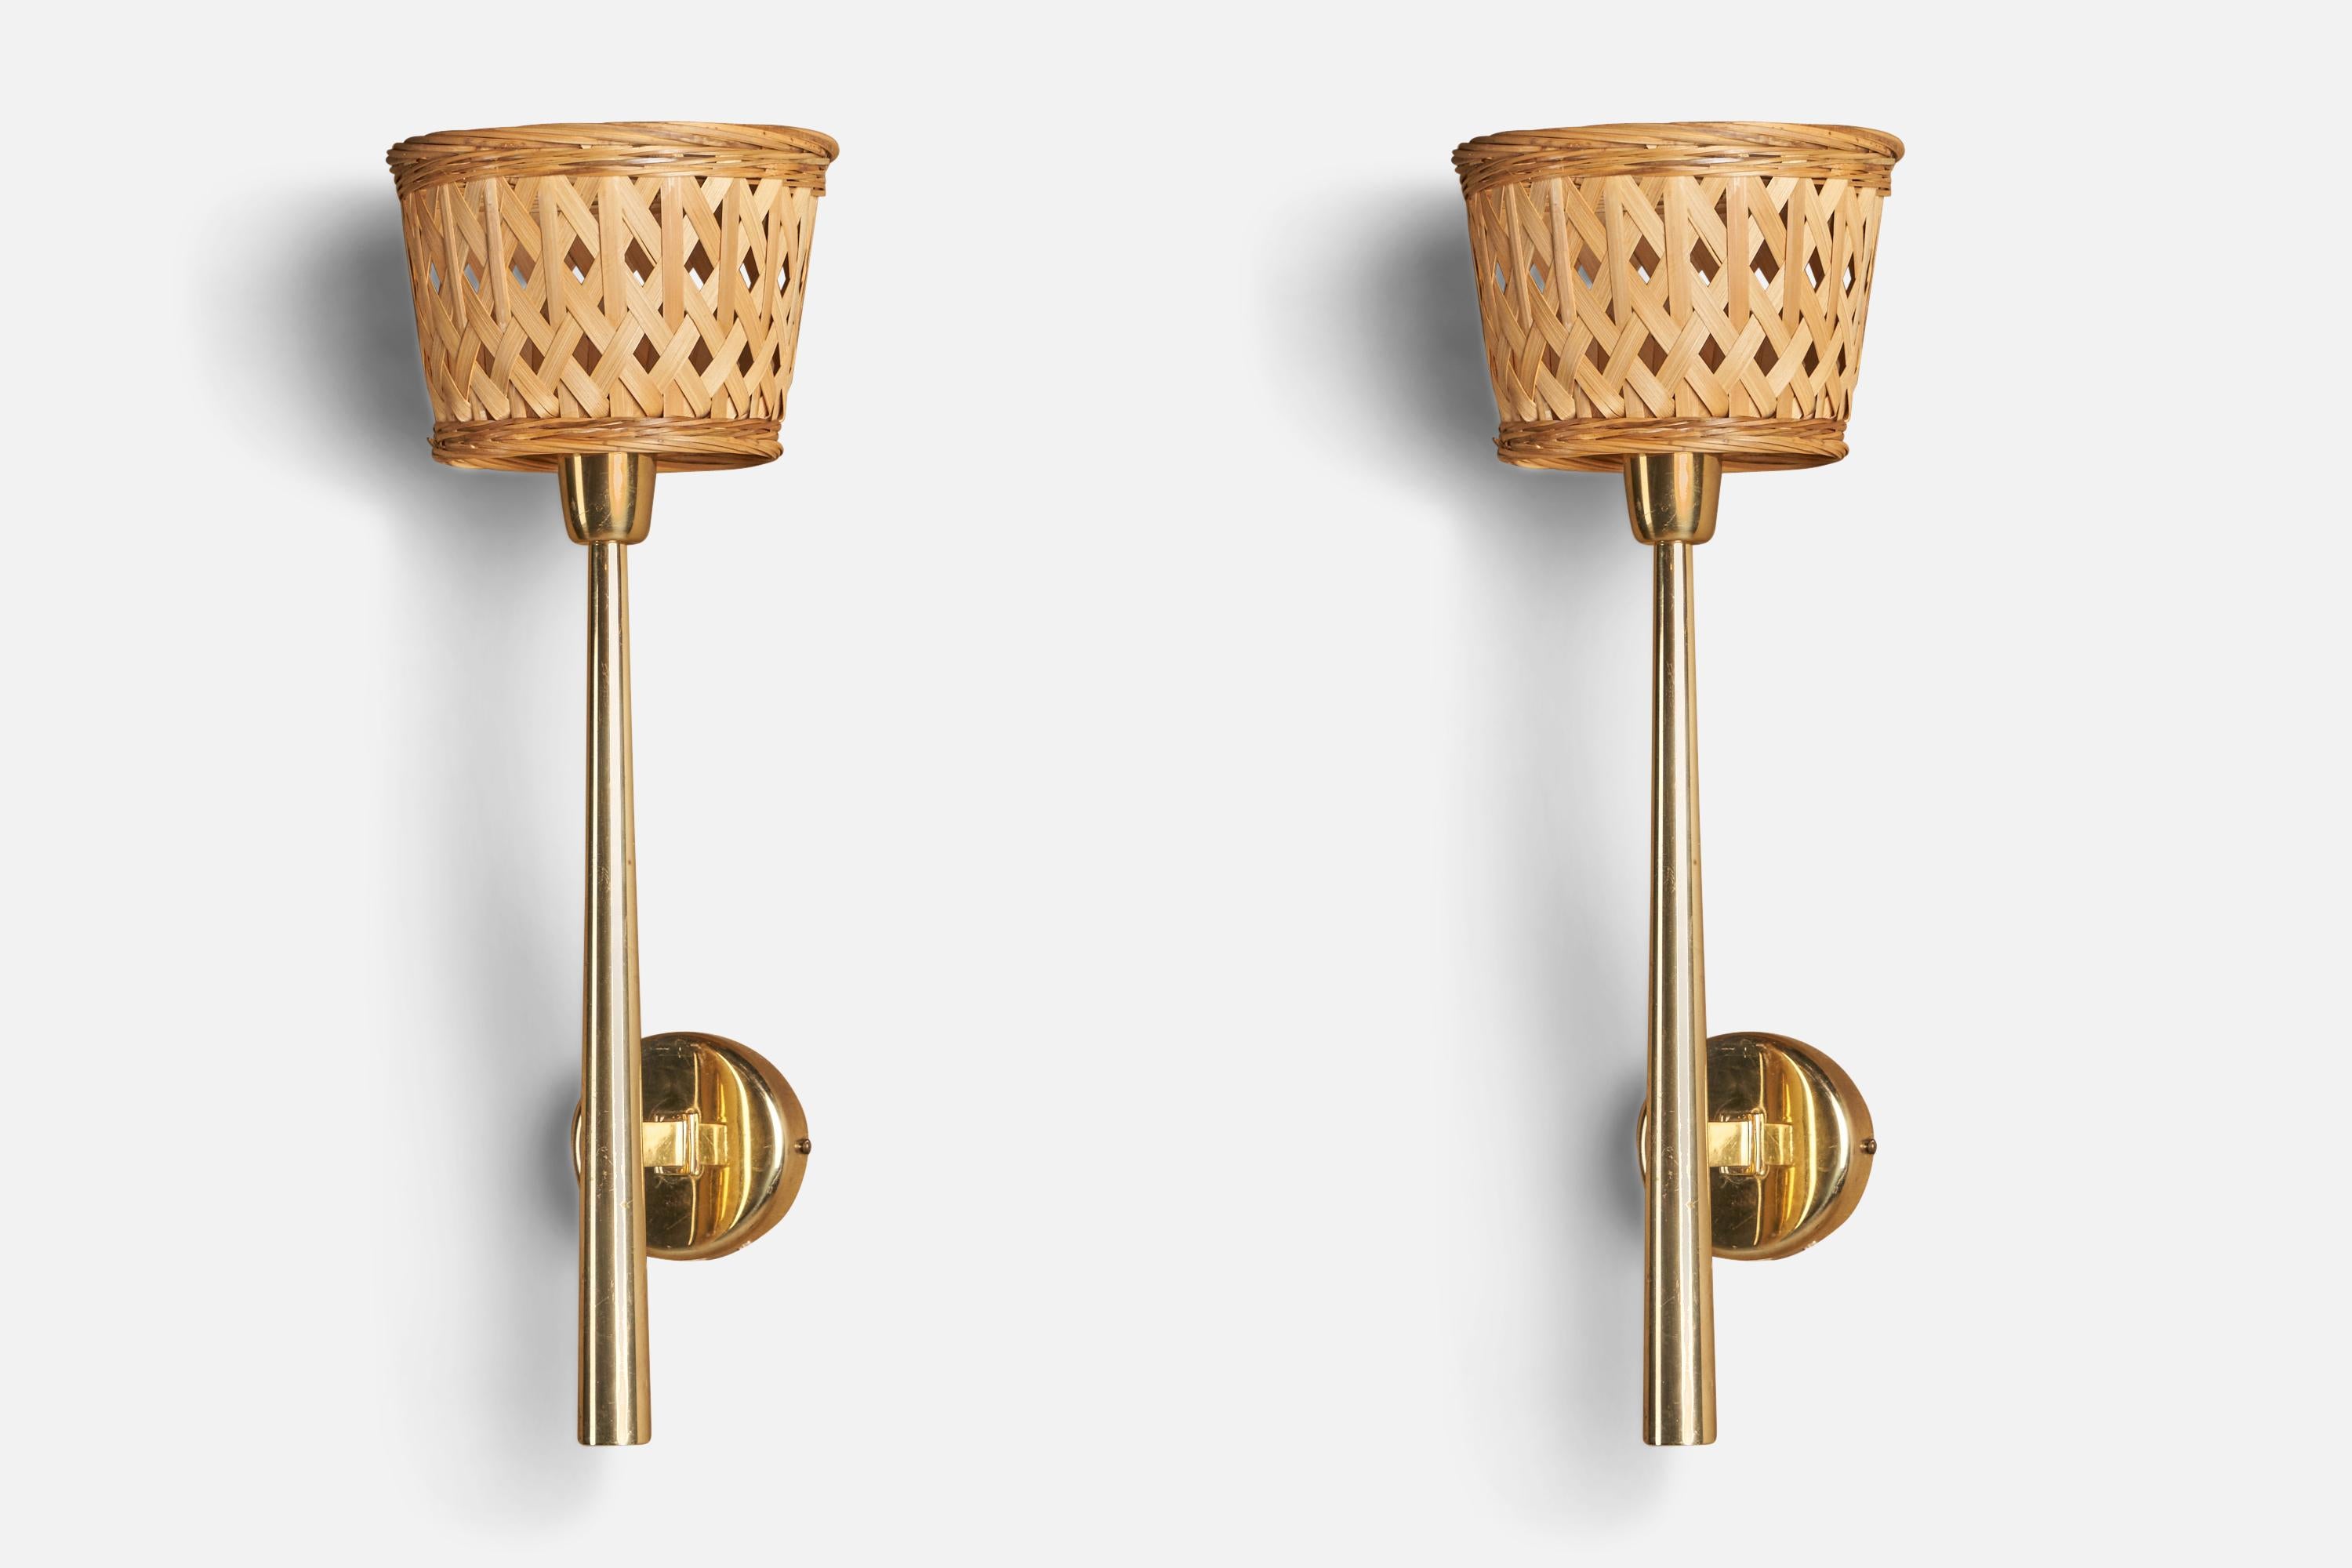 Danish Designer, Wall Lights, Brass, Rattan, Denmark, 1940s In Good Condition For Sale In High Point, NC